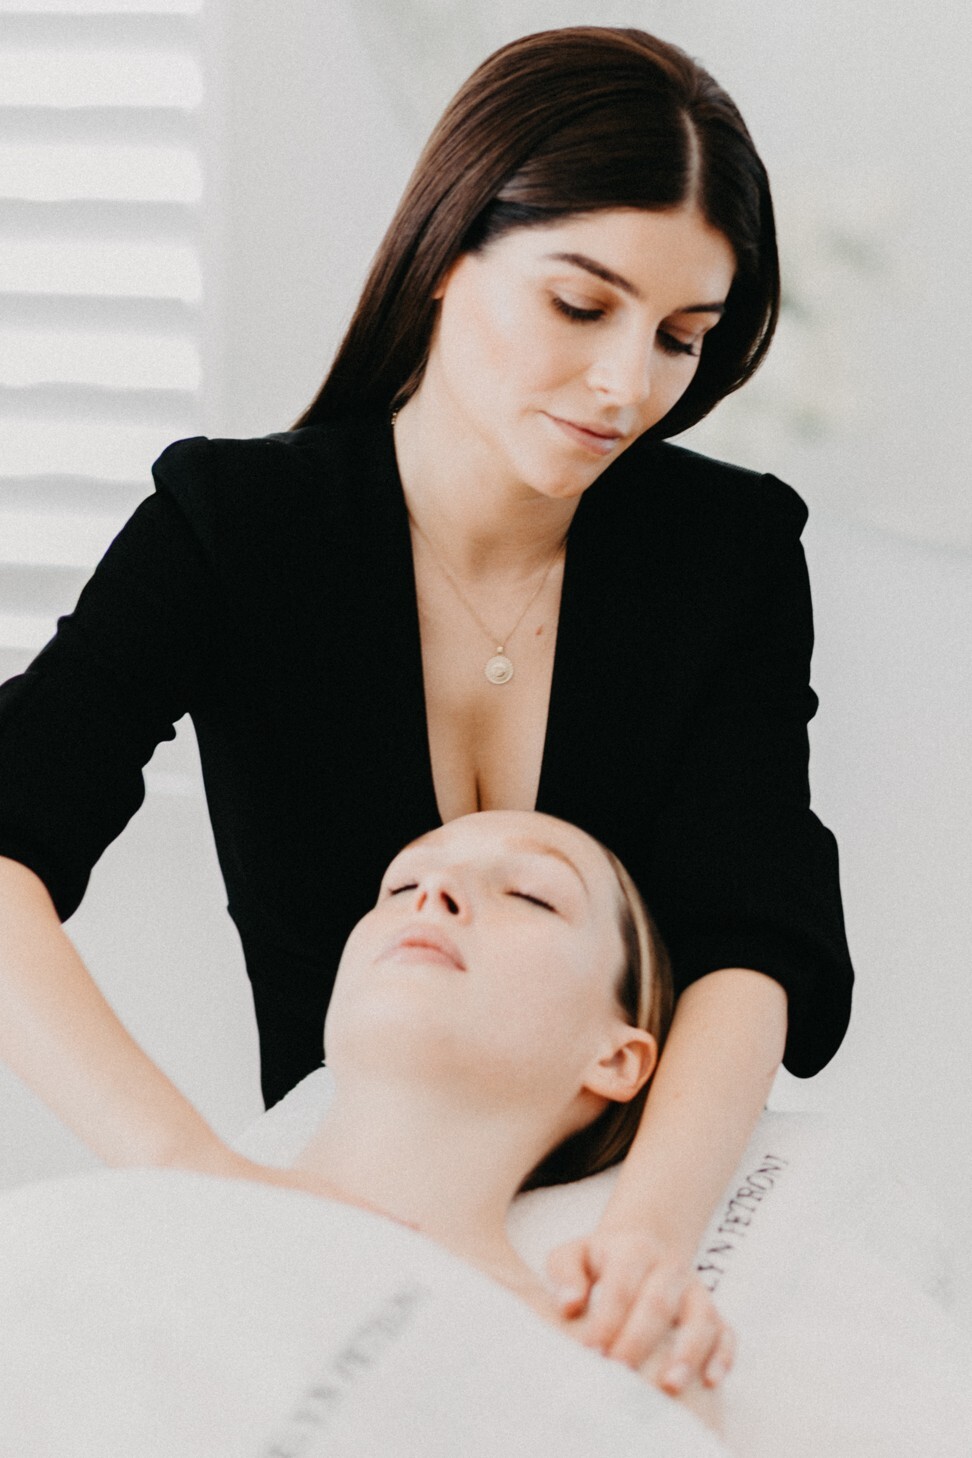 Australian facialist Jocelyn Petroni knows exactly how to pamper her clients.